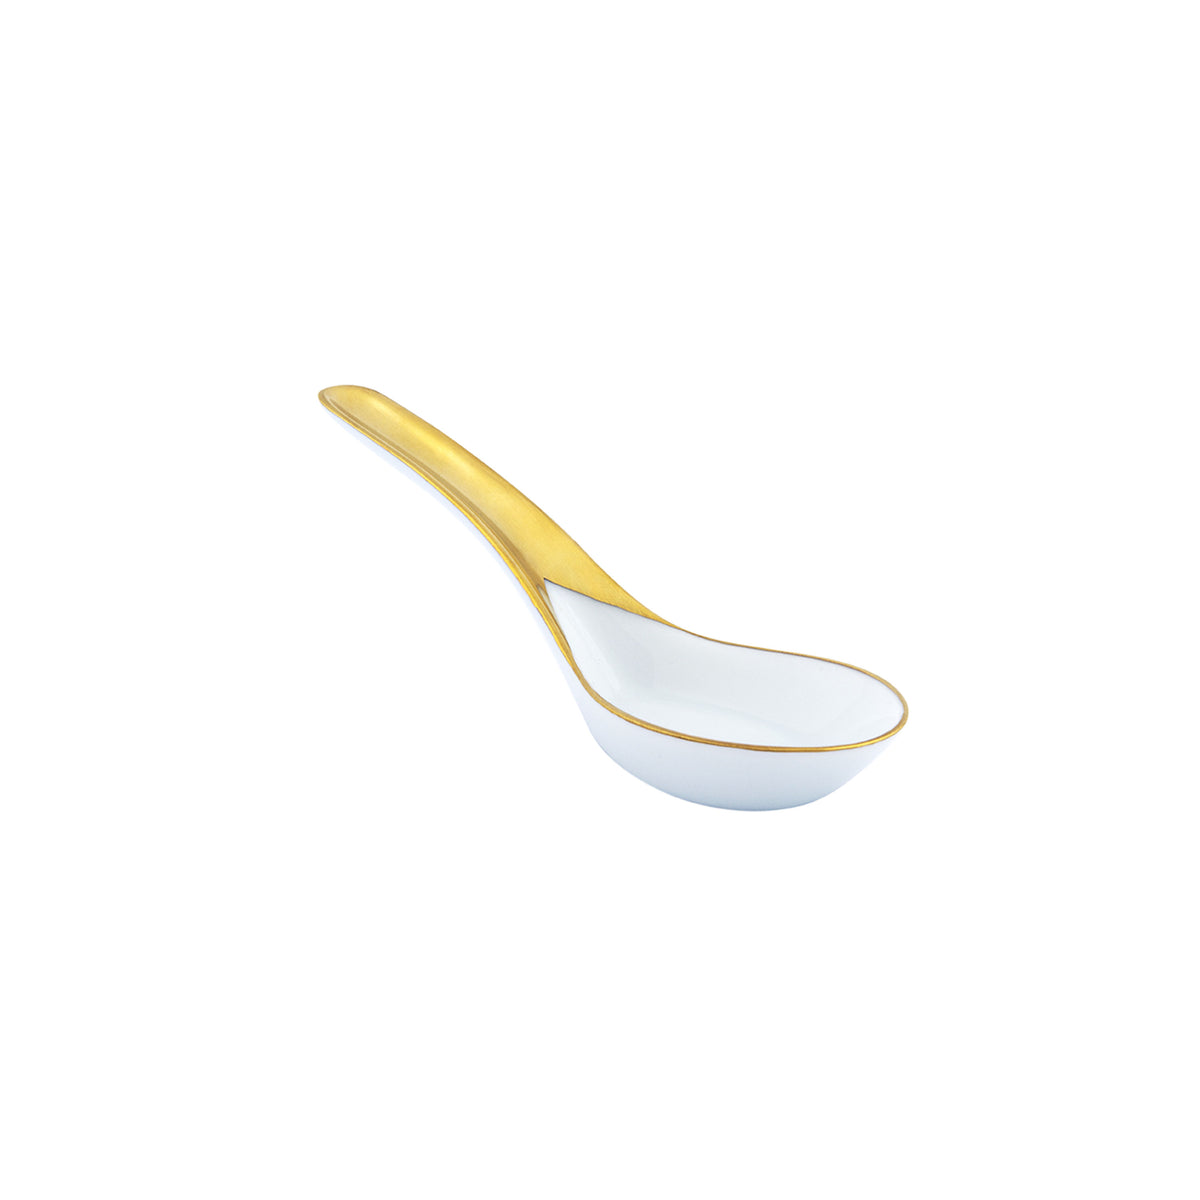 Asian line Gold - Asian Spoon